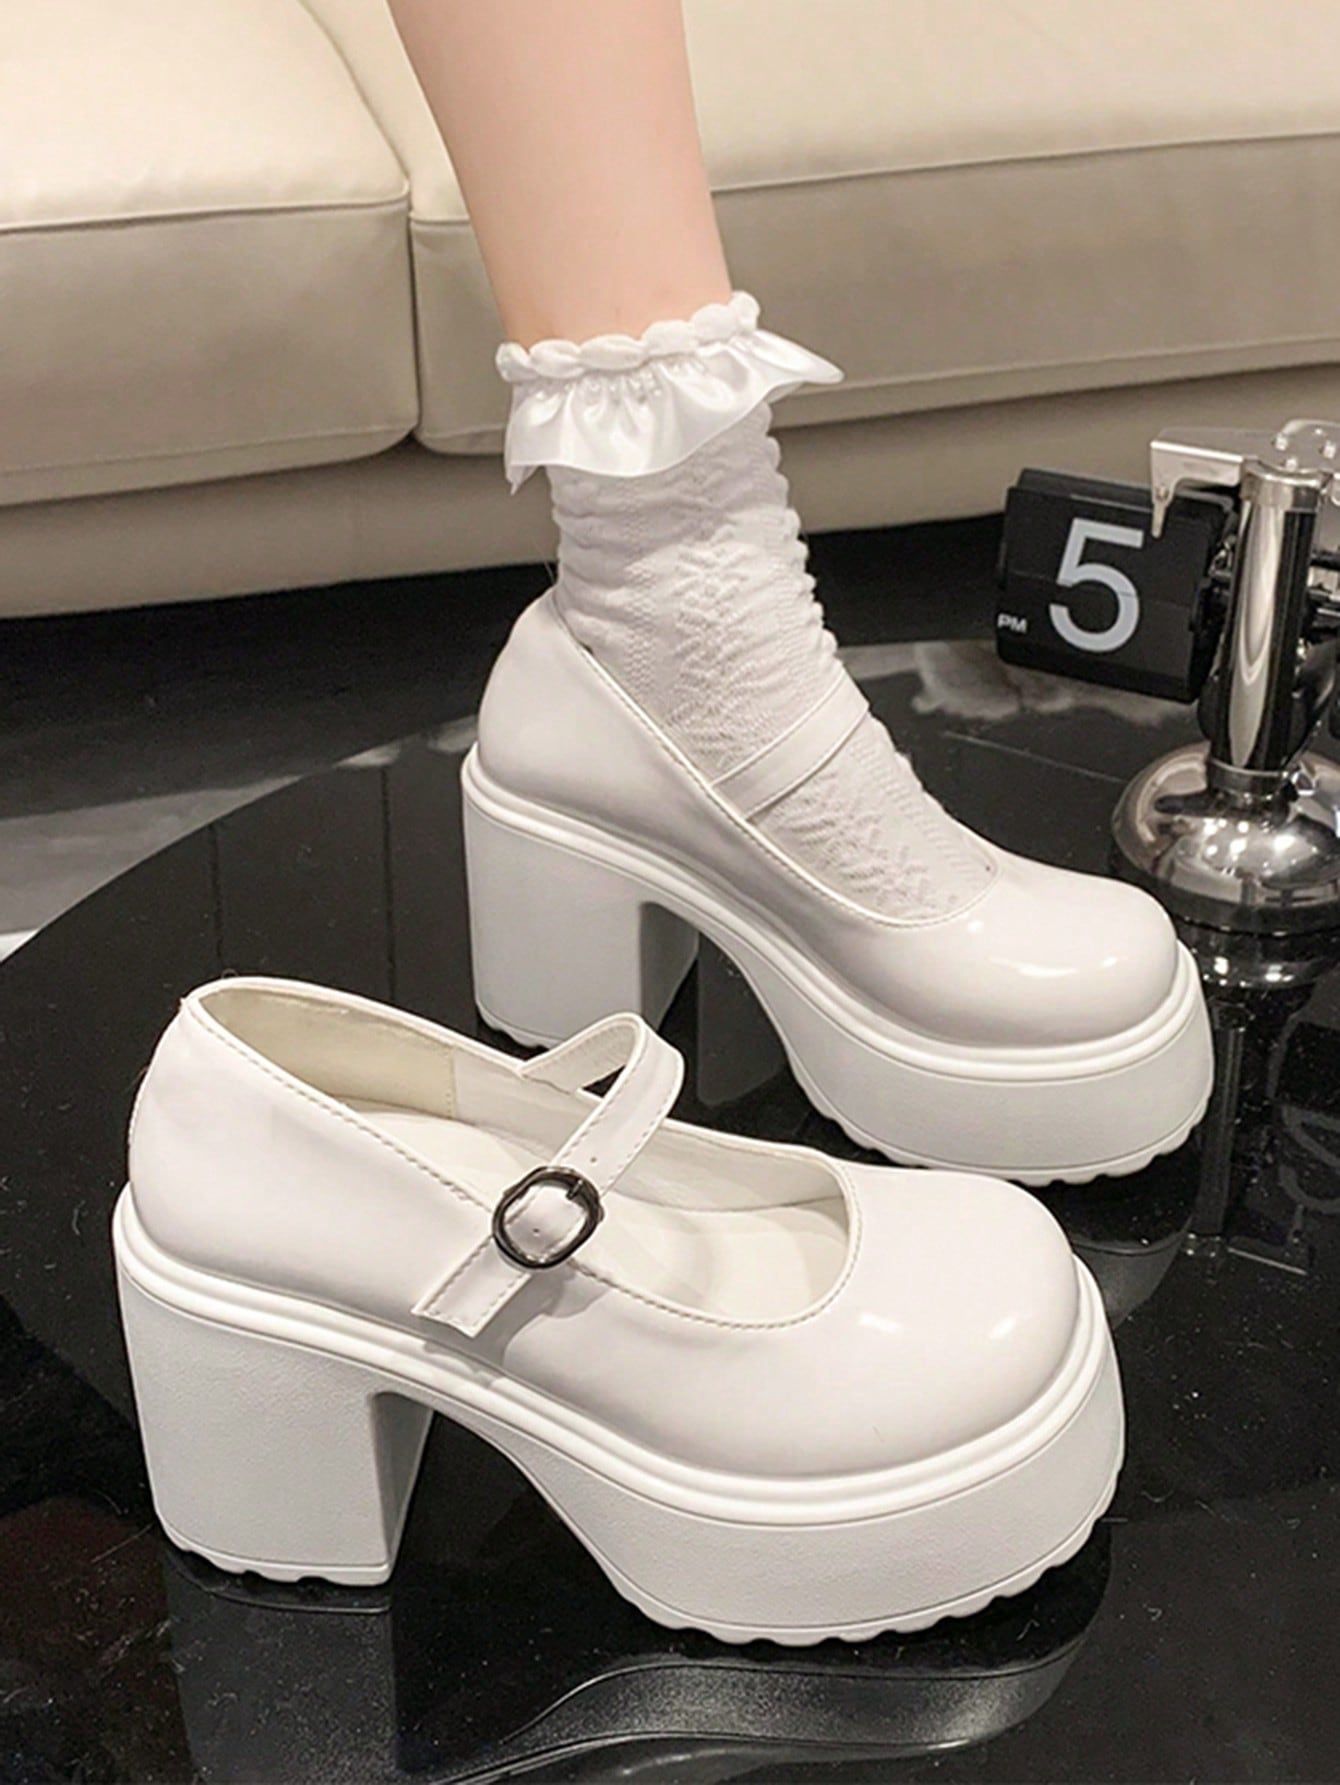 Add attraction to your dressing styles with cute heels